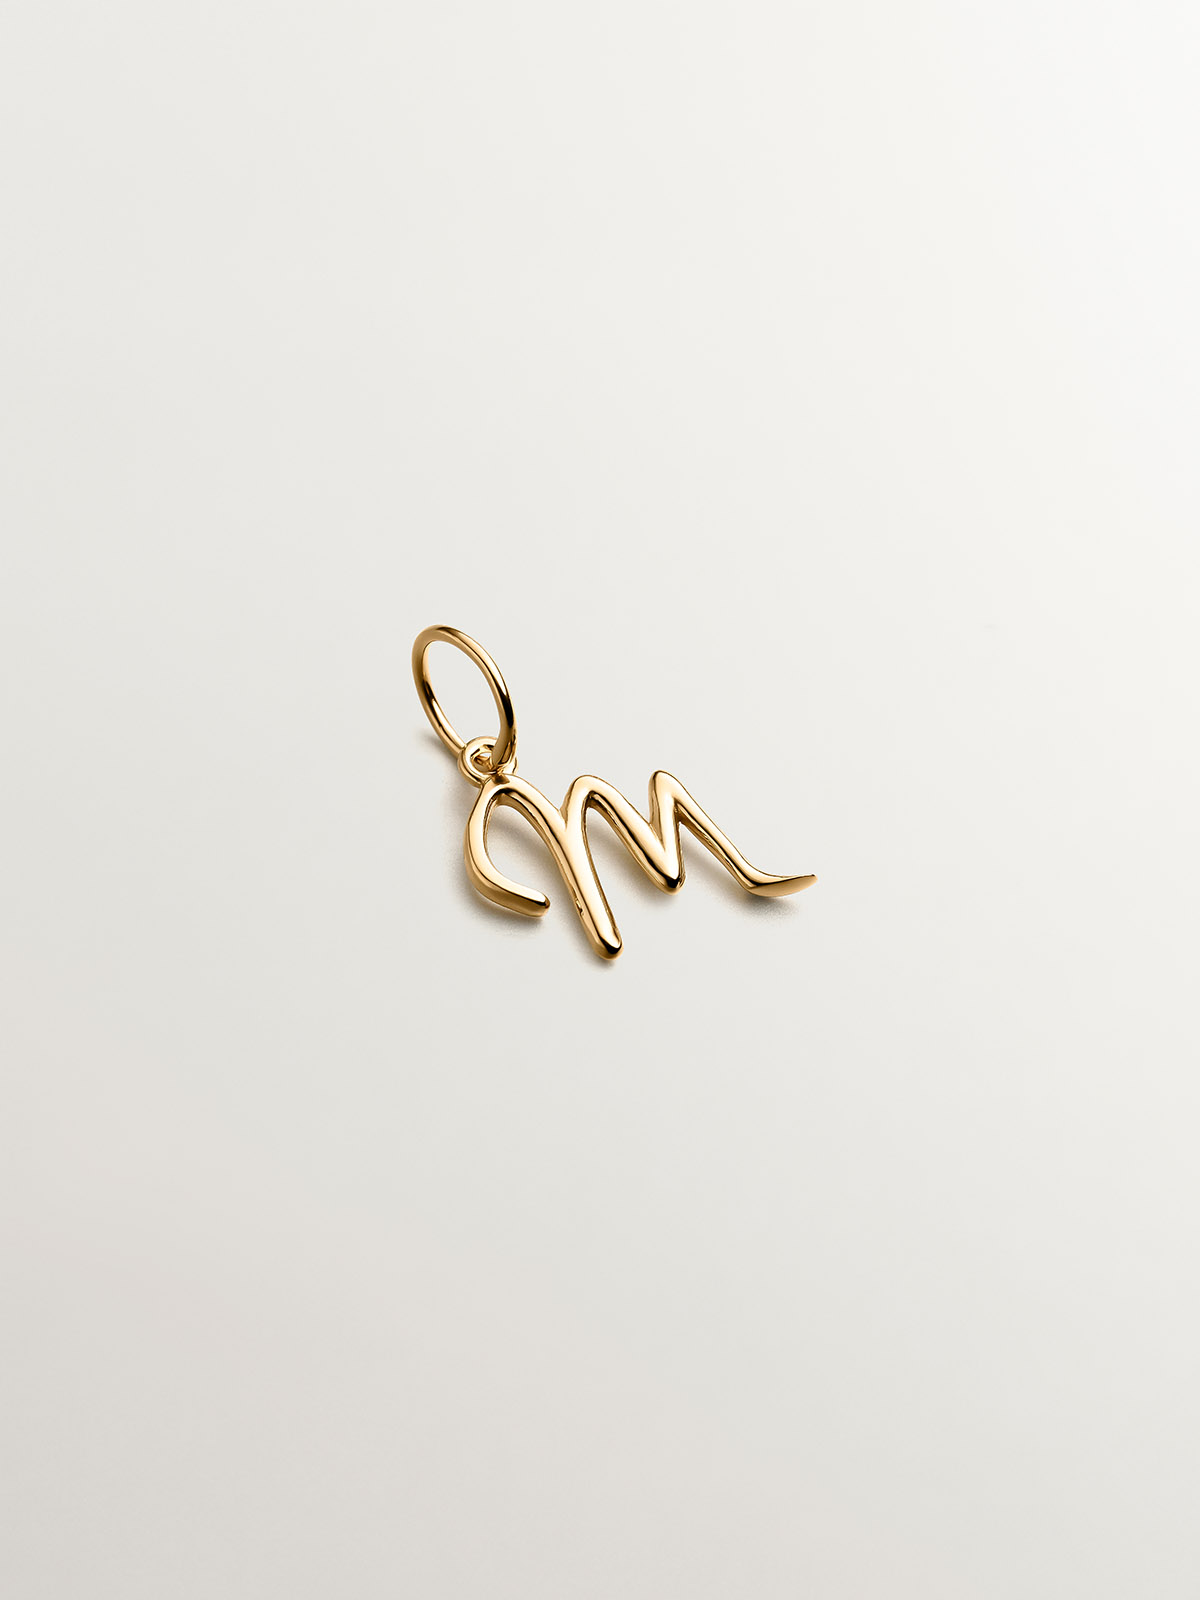 925 Silver charm dipped in 18K yellow gold with initial M.